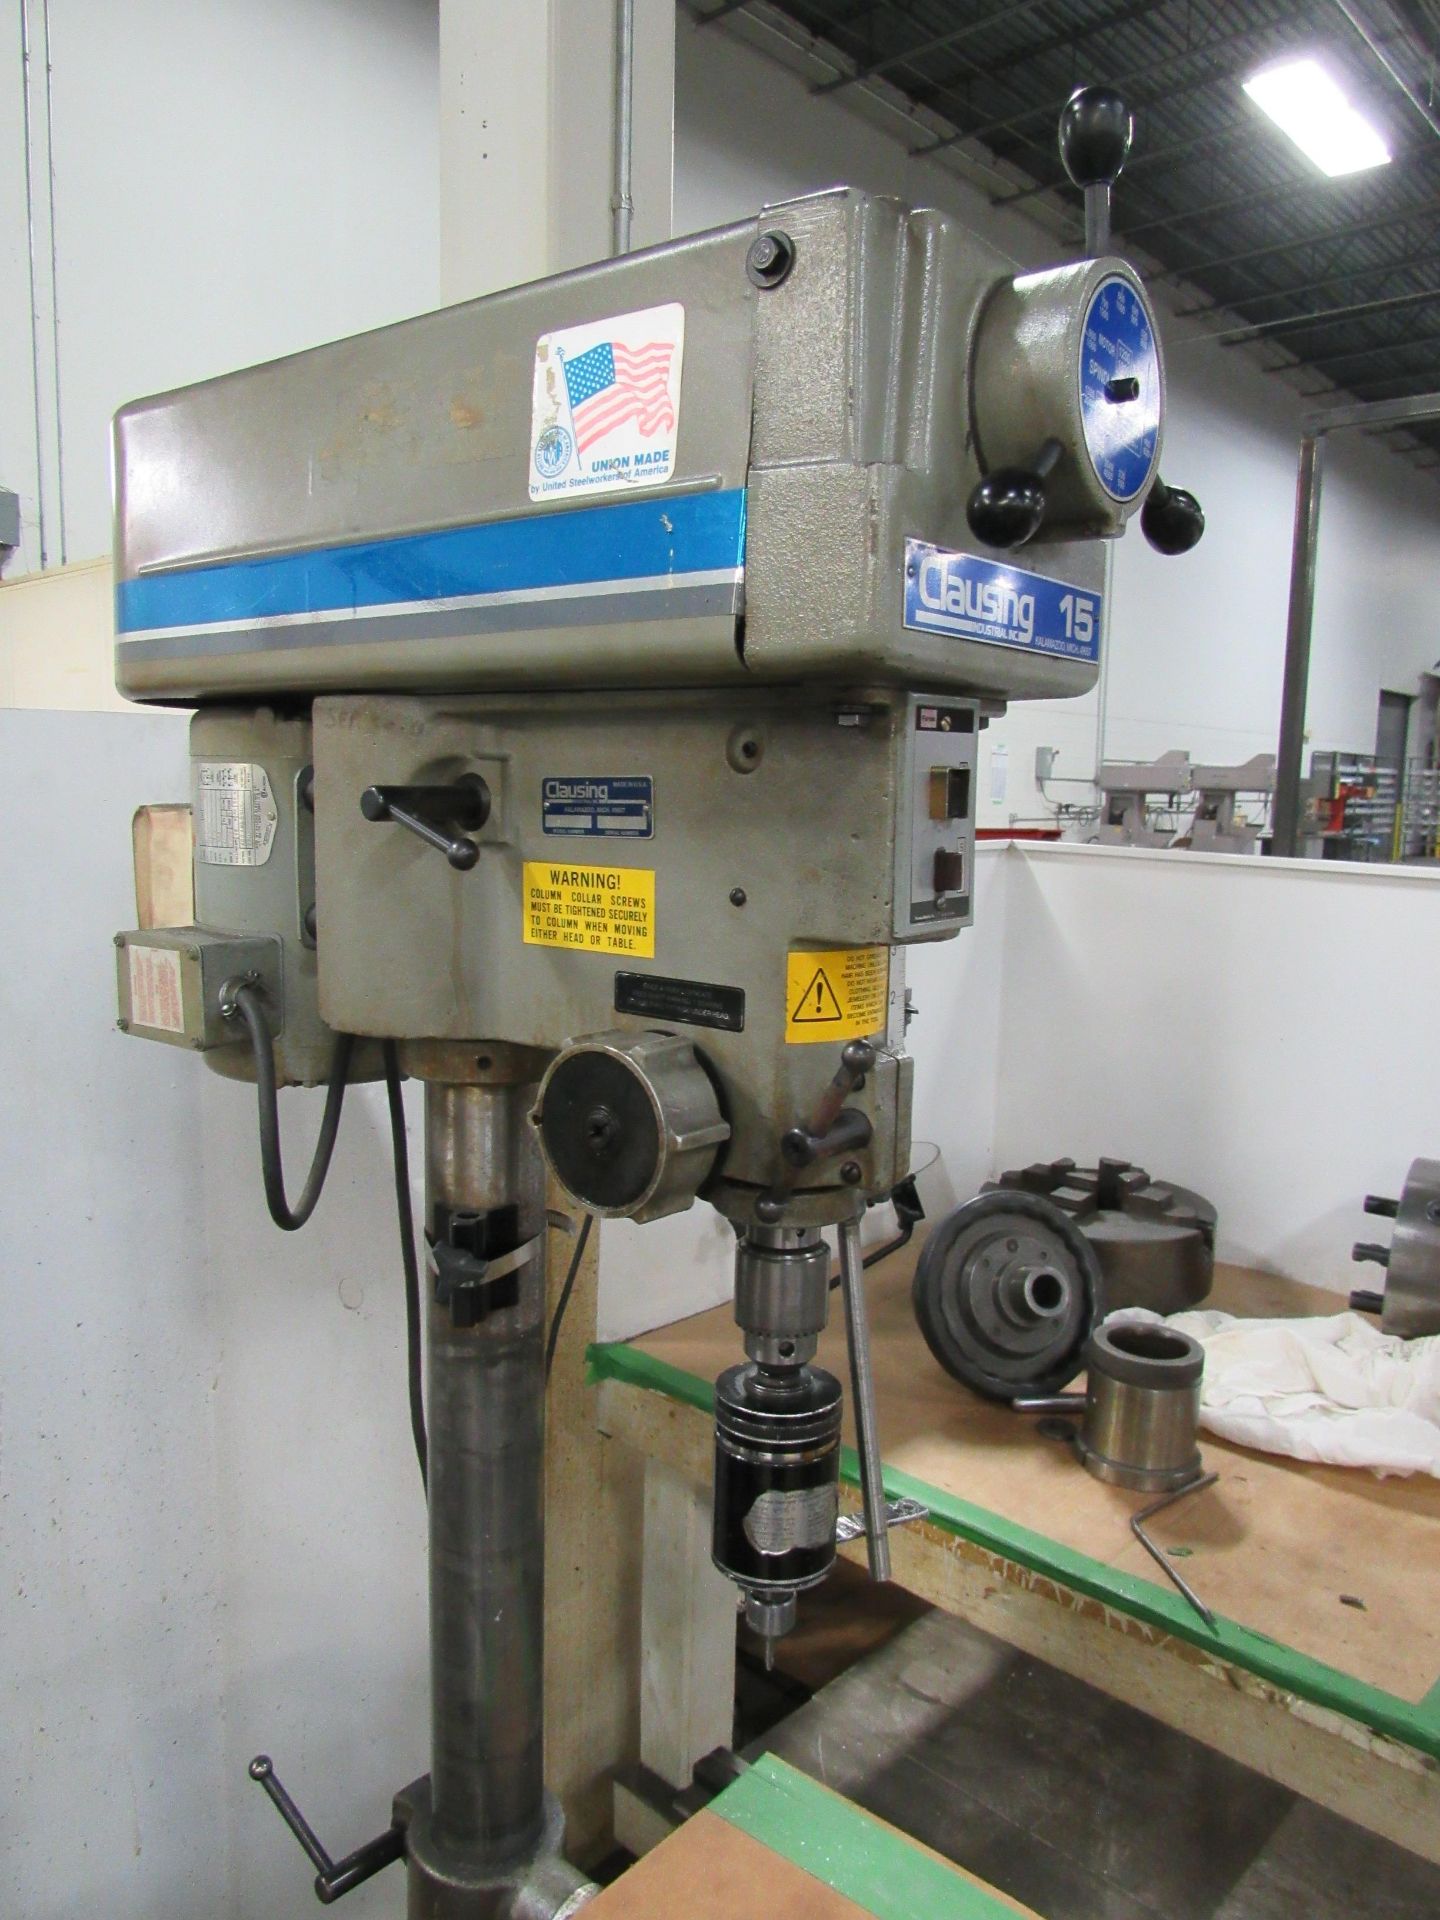 Clausing Model 15 Upright Drill - Image 9 of 10